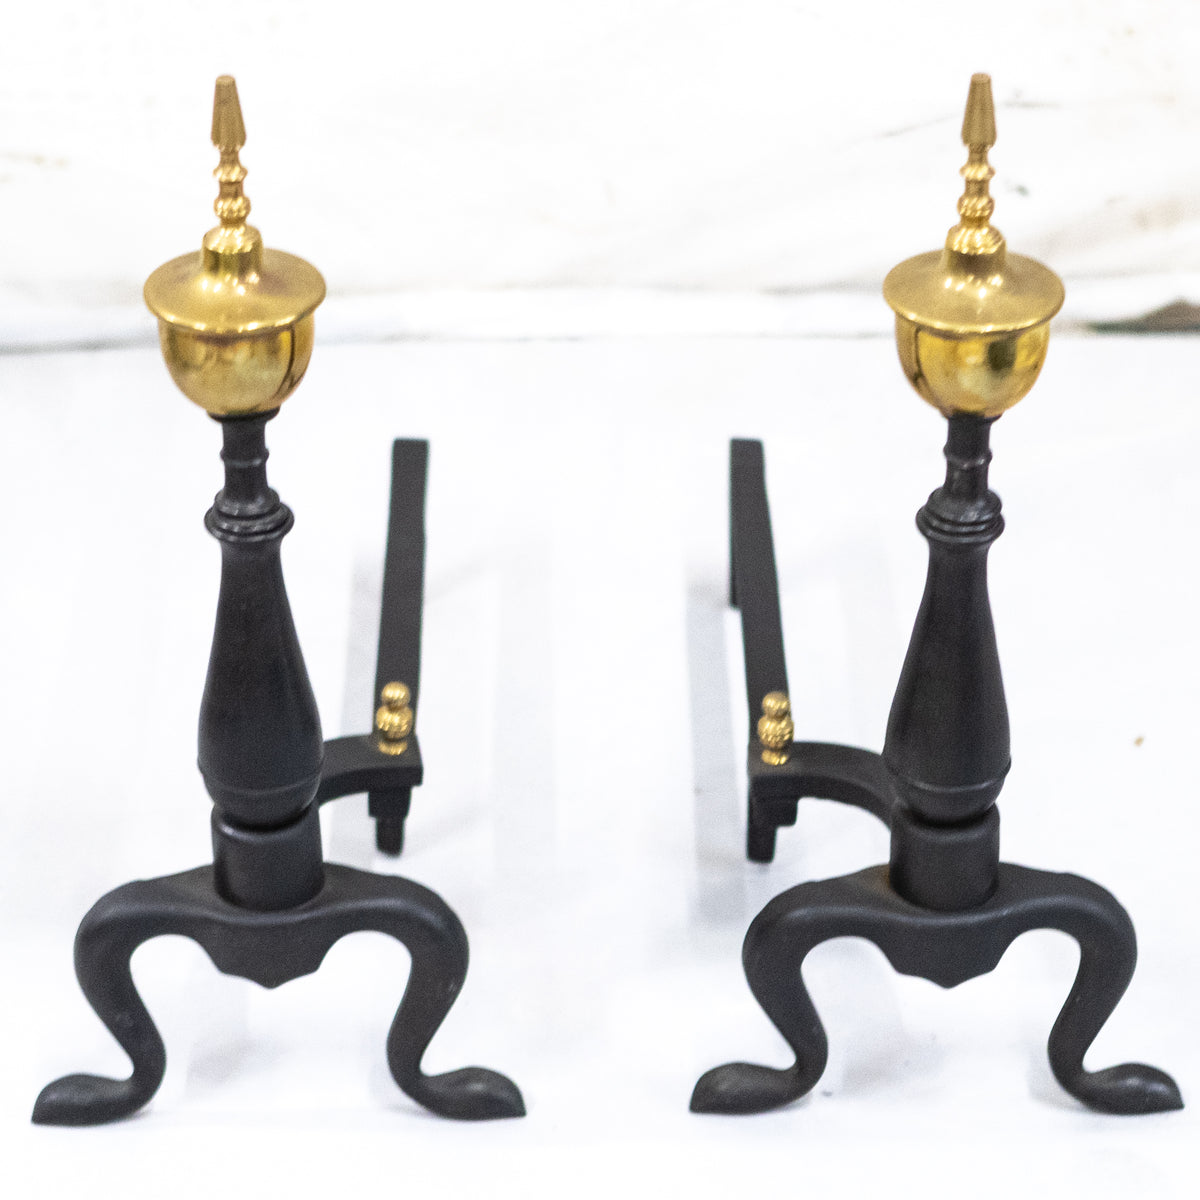 Antique Cast Iron Andirons | Brass Finial Firedogs | The Architectural Forum